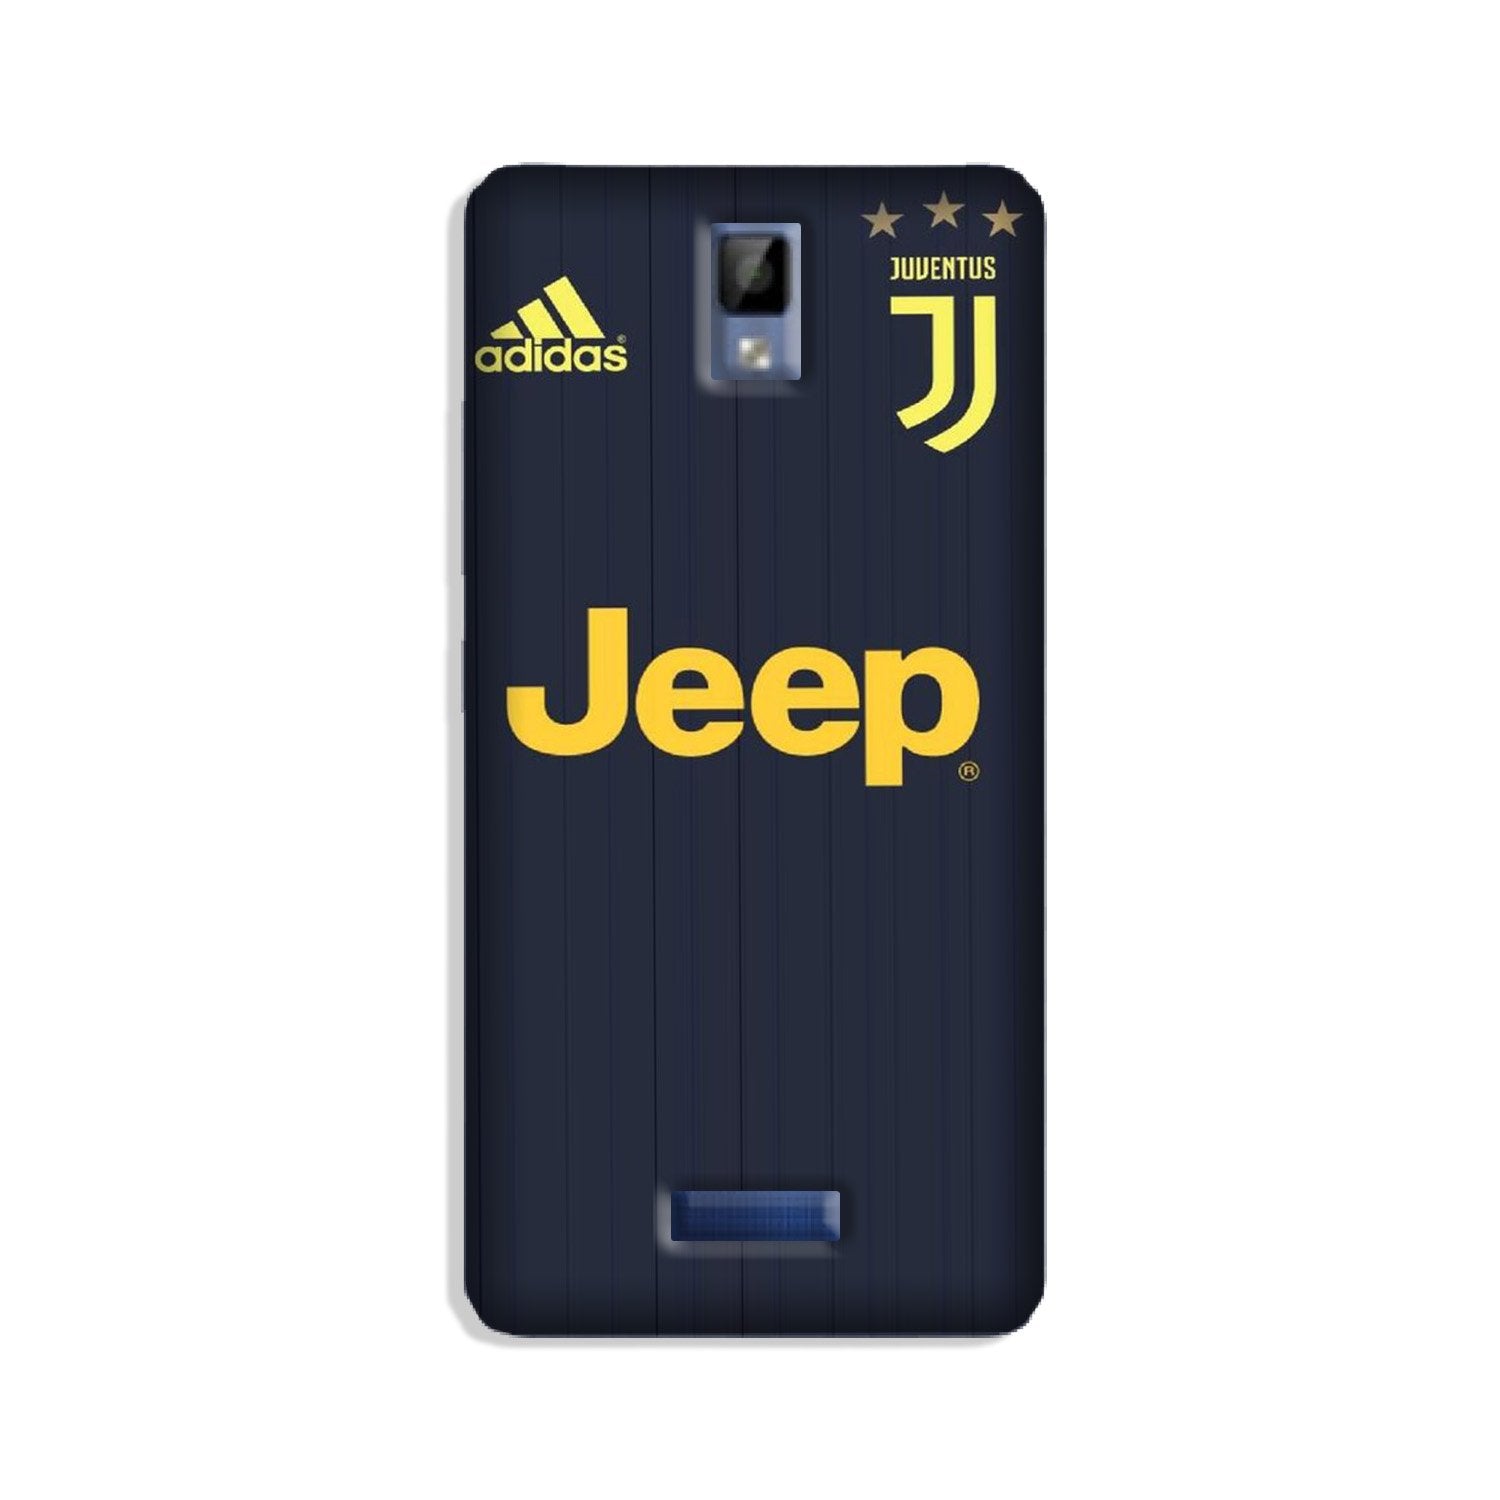 Jeep Juventus Case for Gionee P7(Design - 161)